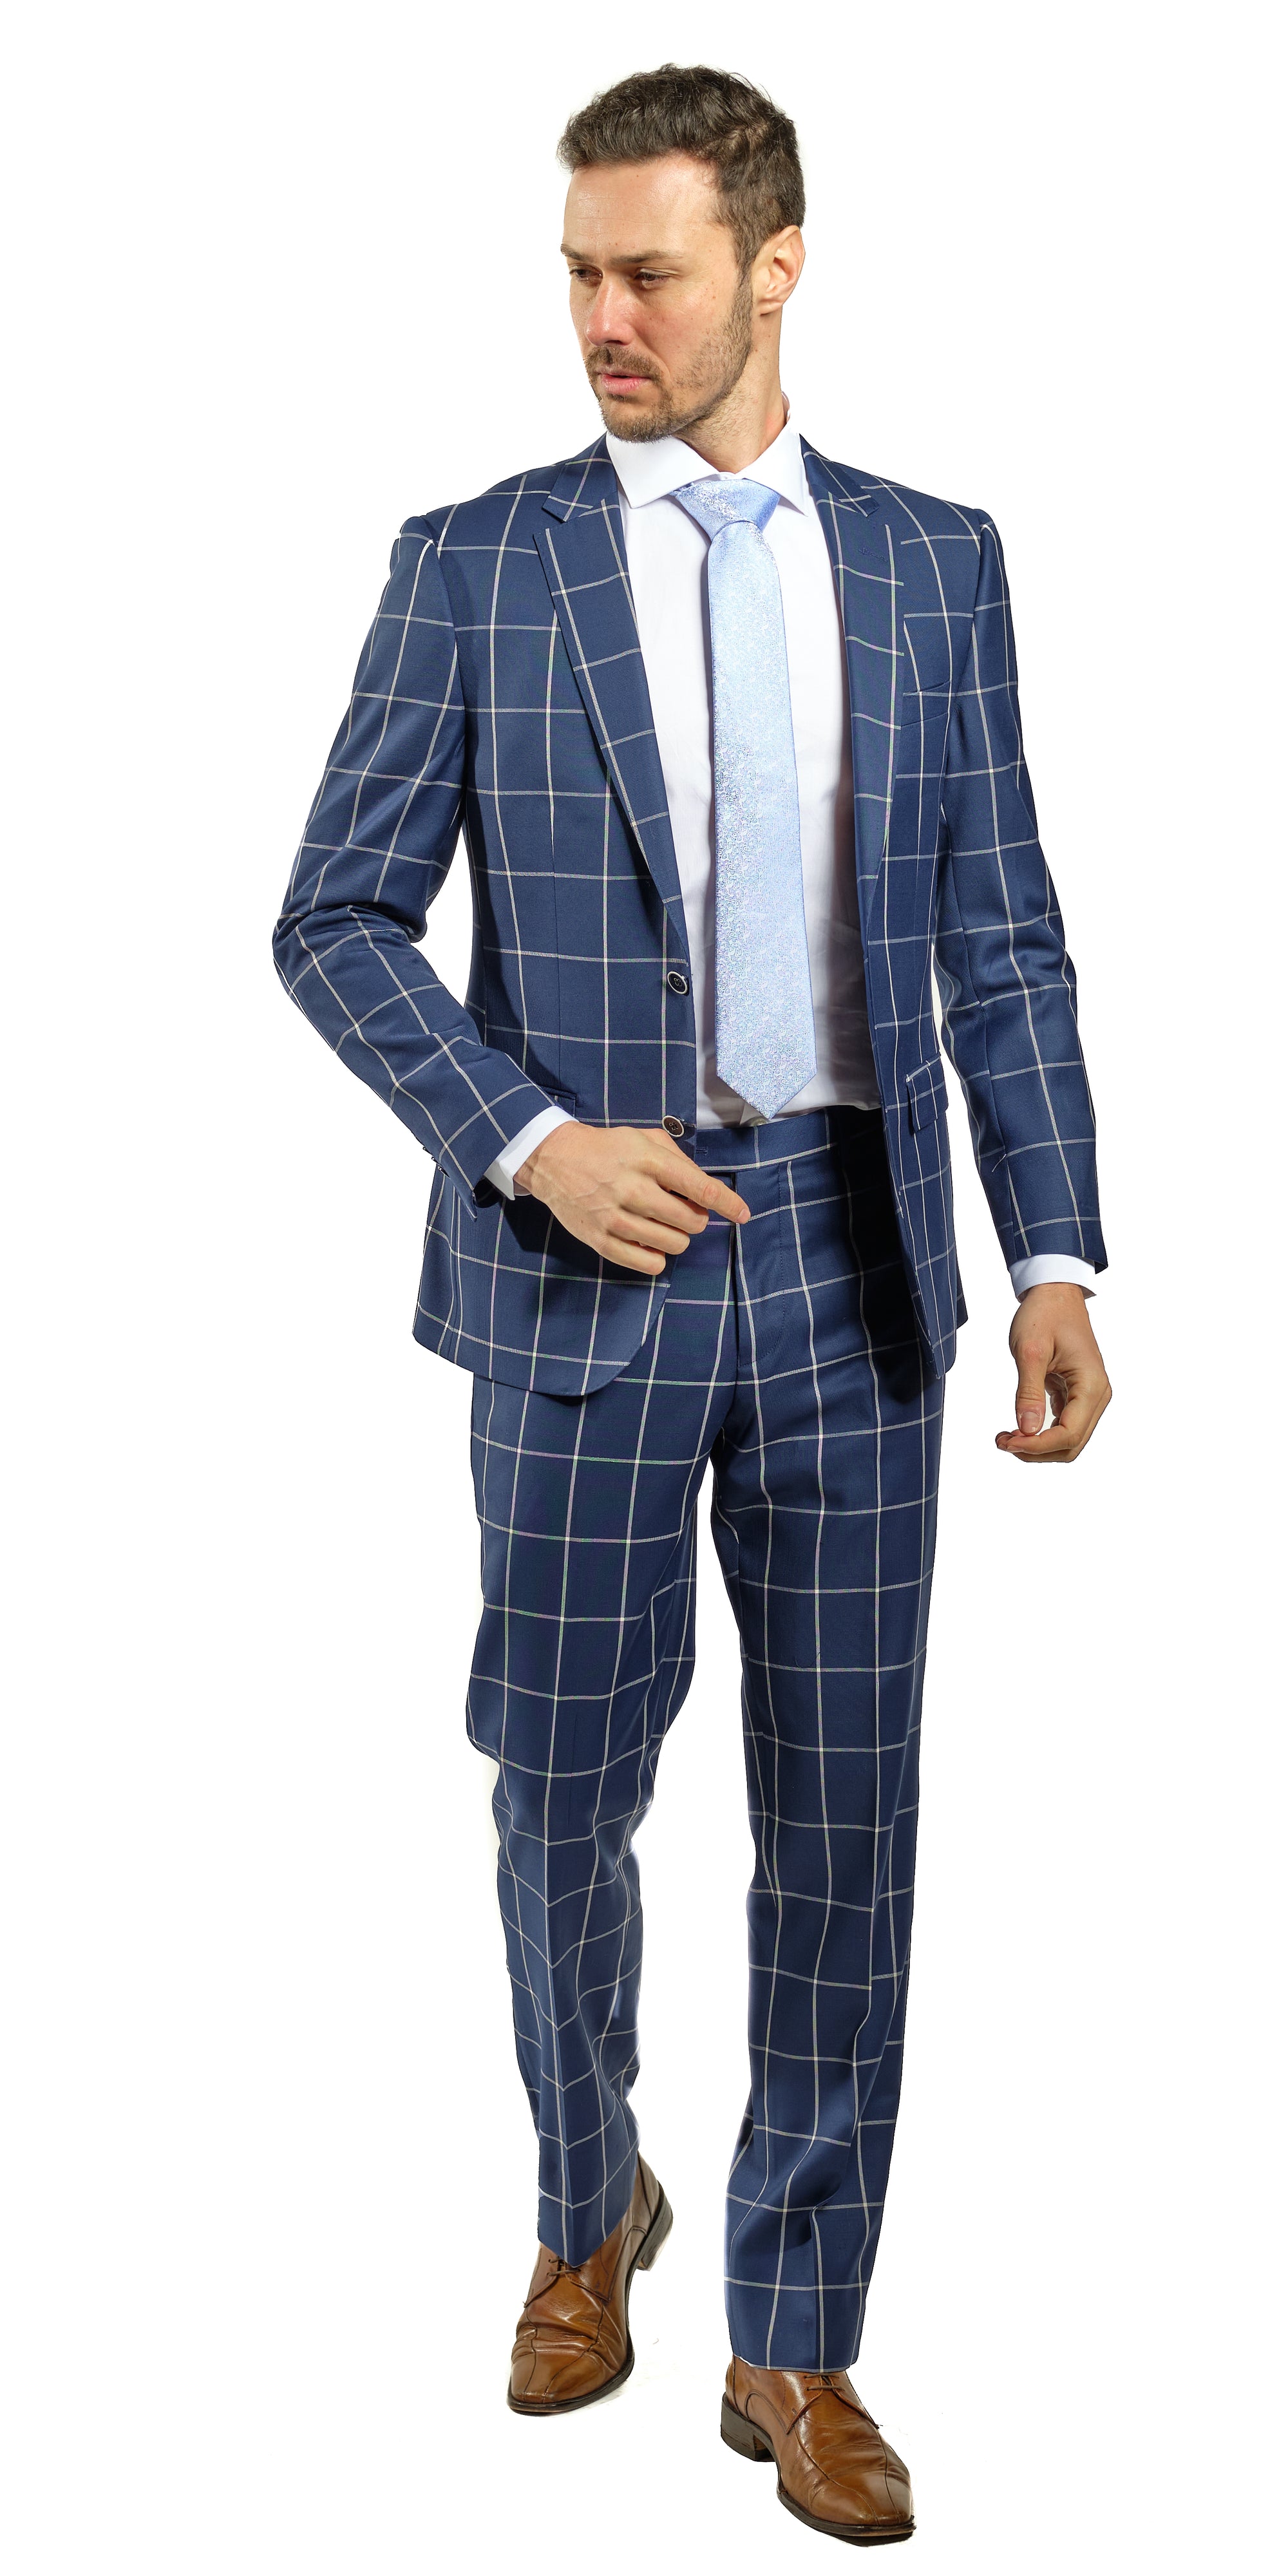 Navy White Bold Windowpane Suit-The Suit Spot-Wedding Suits-Wedding Tuxedos-Groomsmen Suits-Groomsmen Tuxedos-Slim Fit Suits-Slim Fit Tuxedos-Online wedding suits